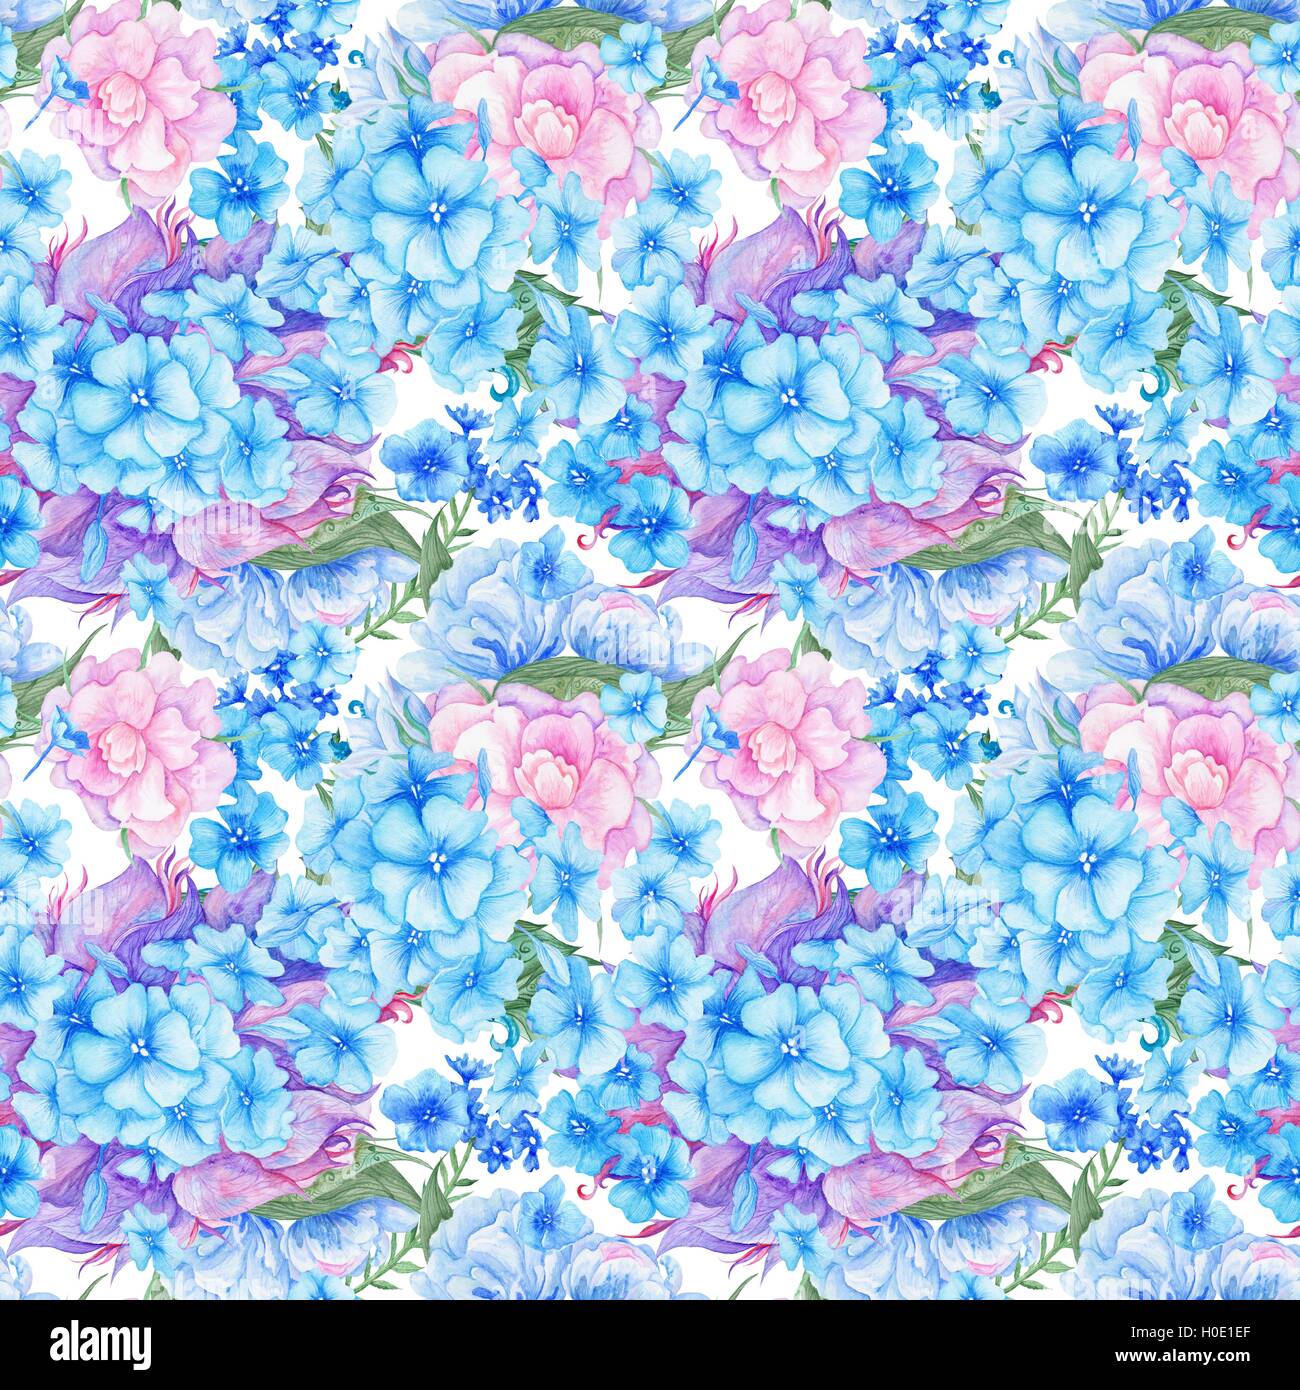 Seamless Watercolor Flower Texture For Wedding Wallpaper Textile